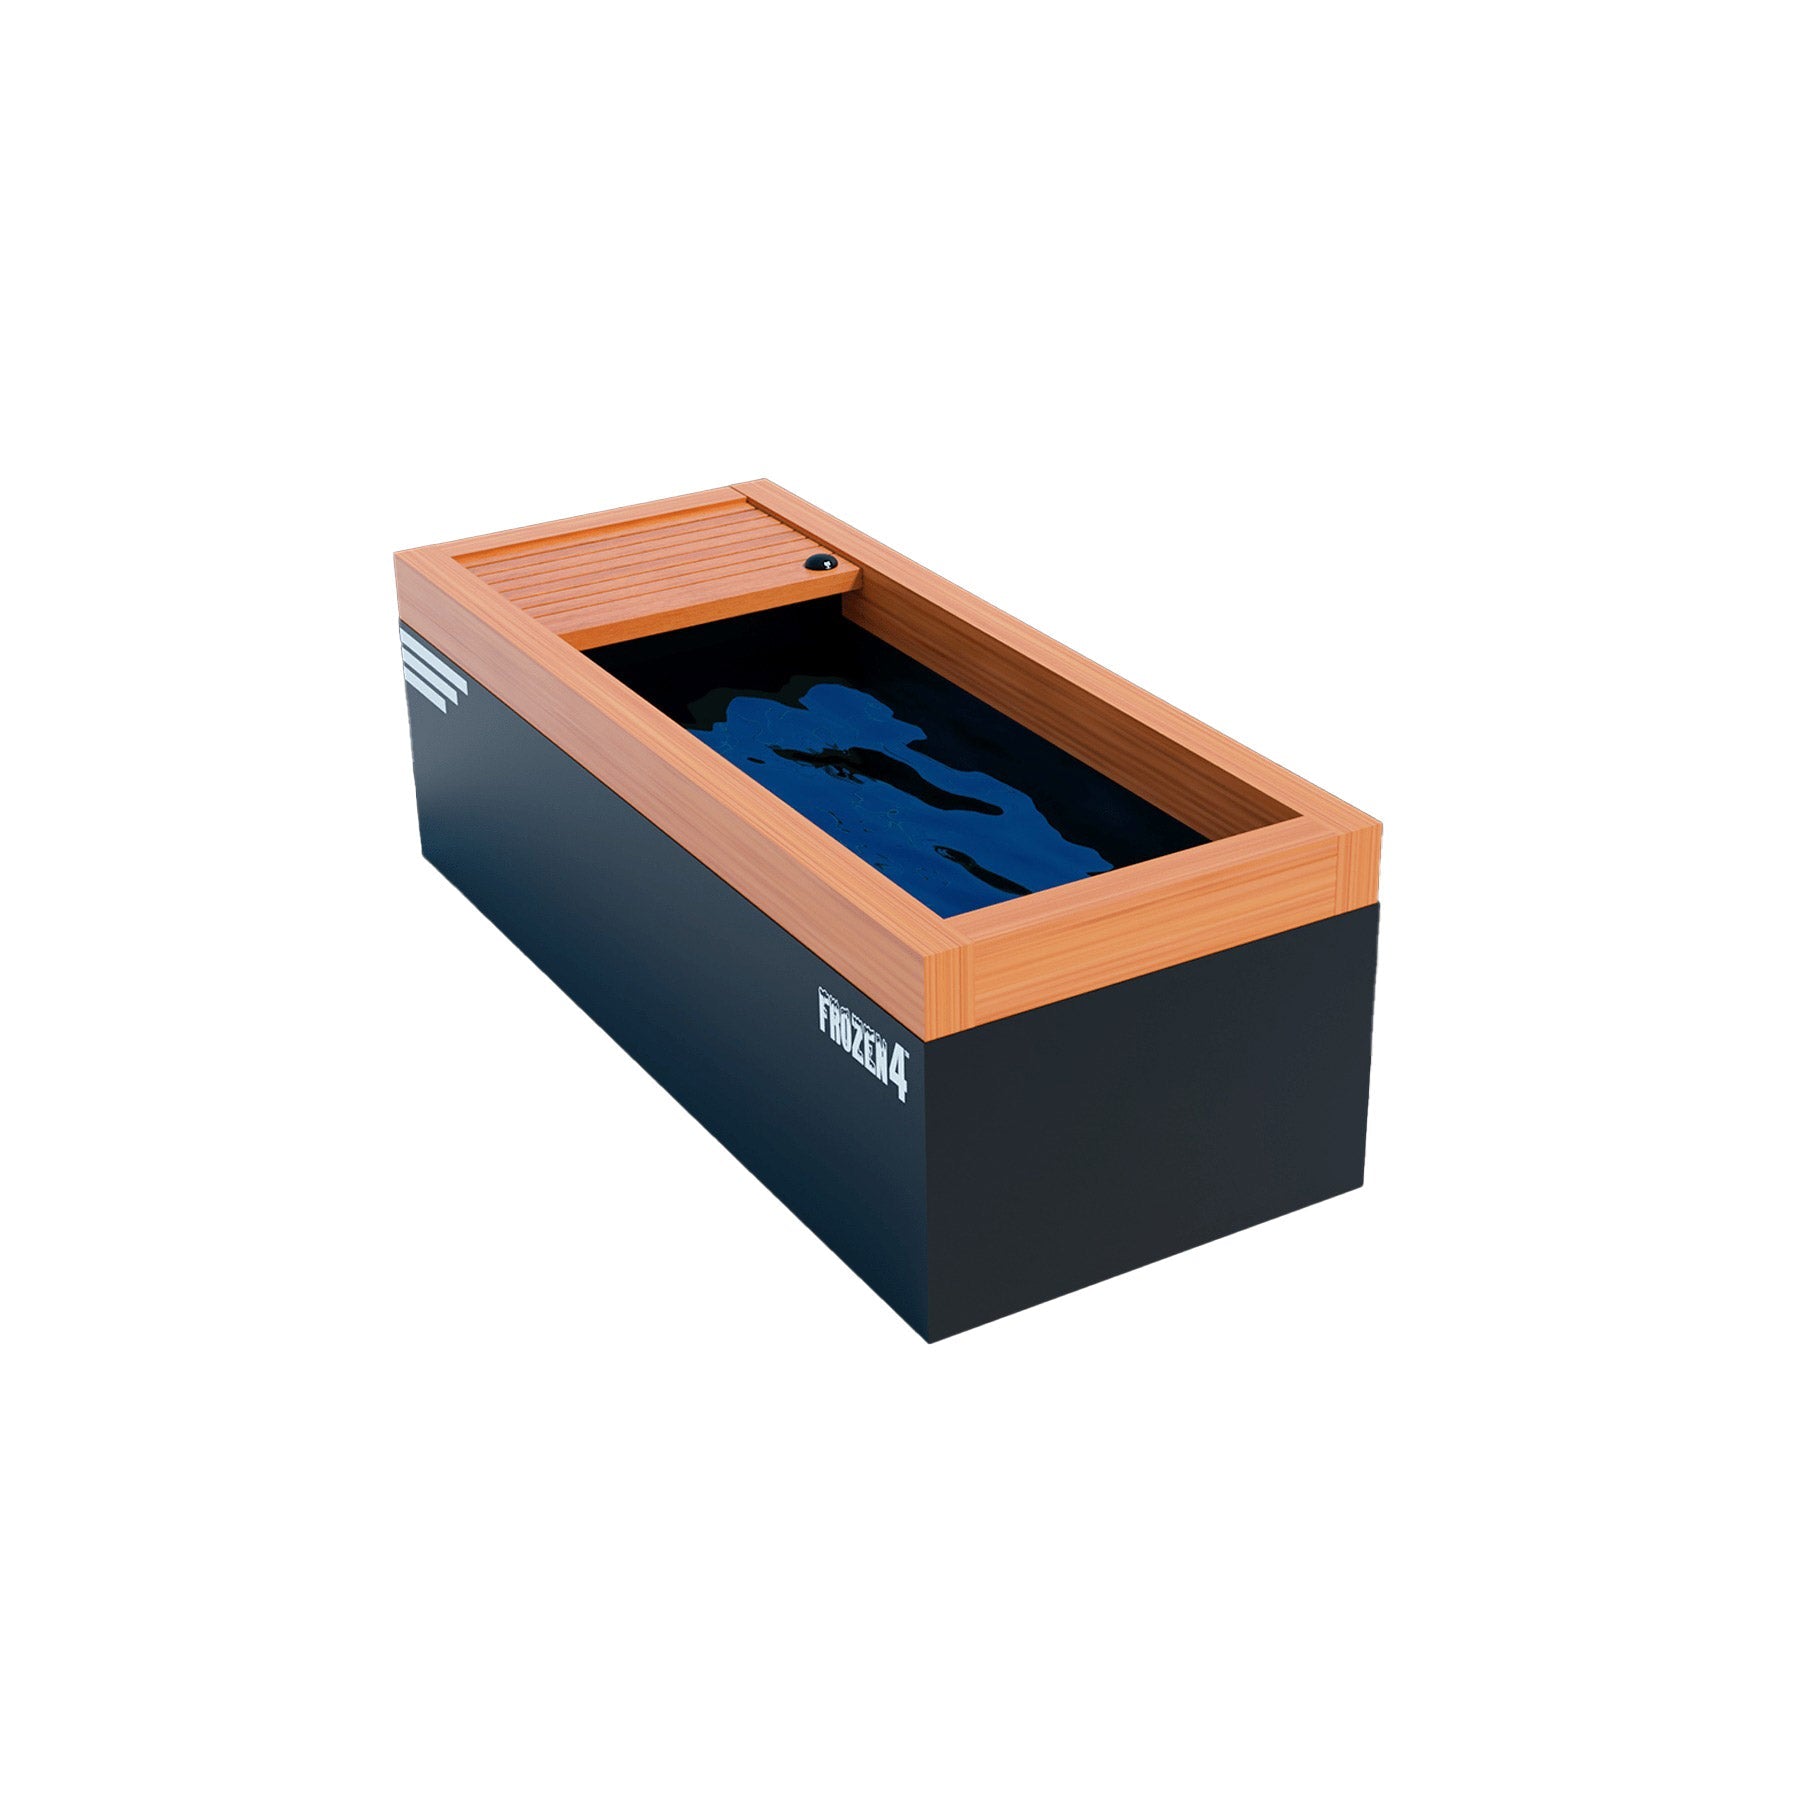 A Medical Sauna wooden box infused with a blue liquid.